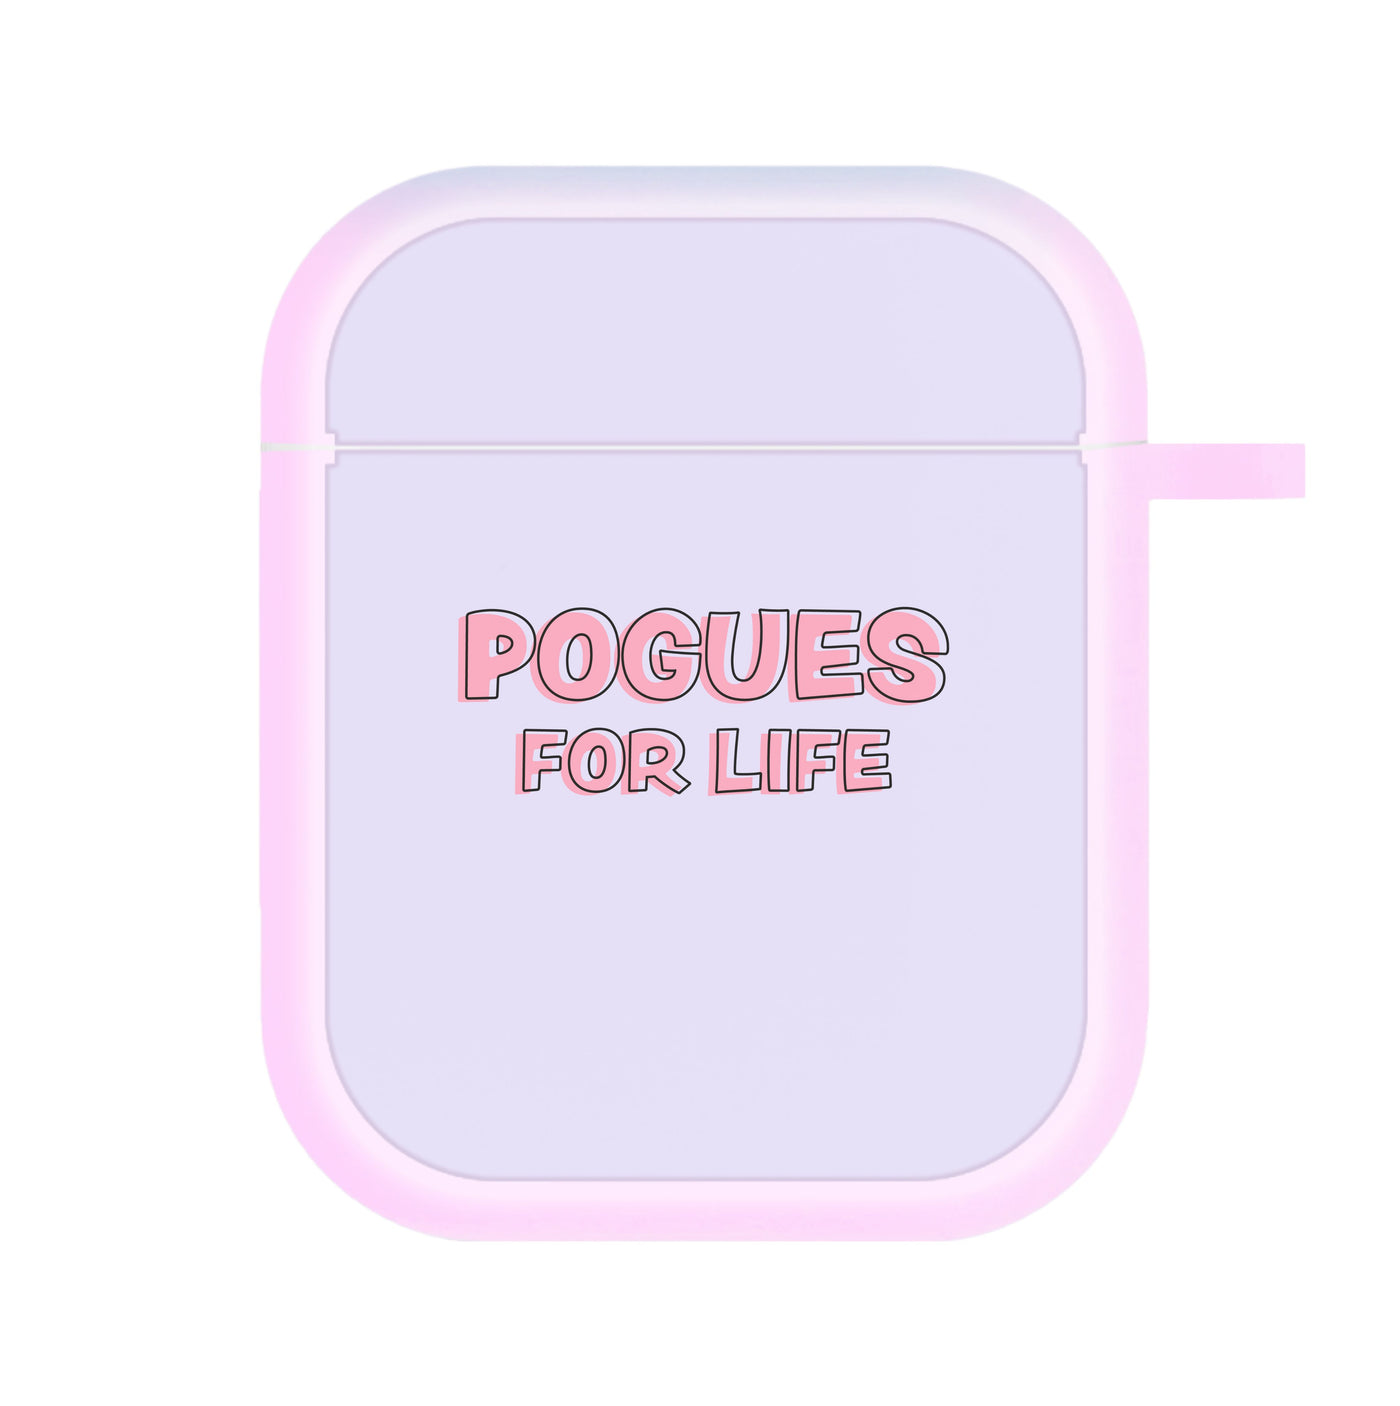 Pogues For Life - Outer Banks AirPods Case